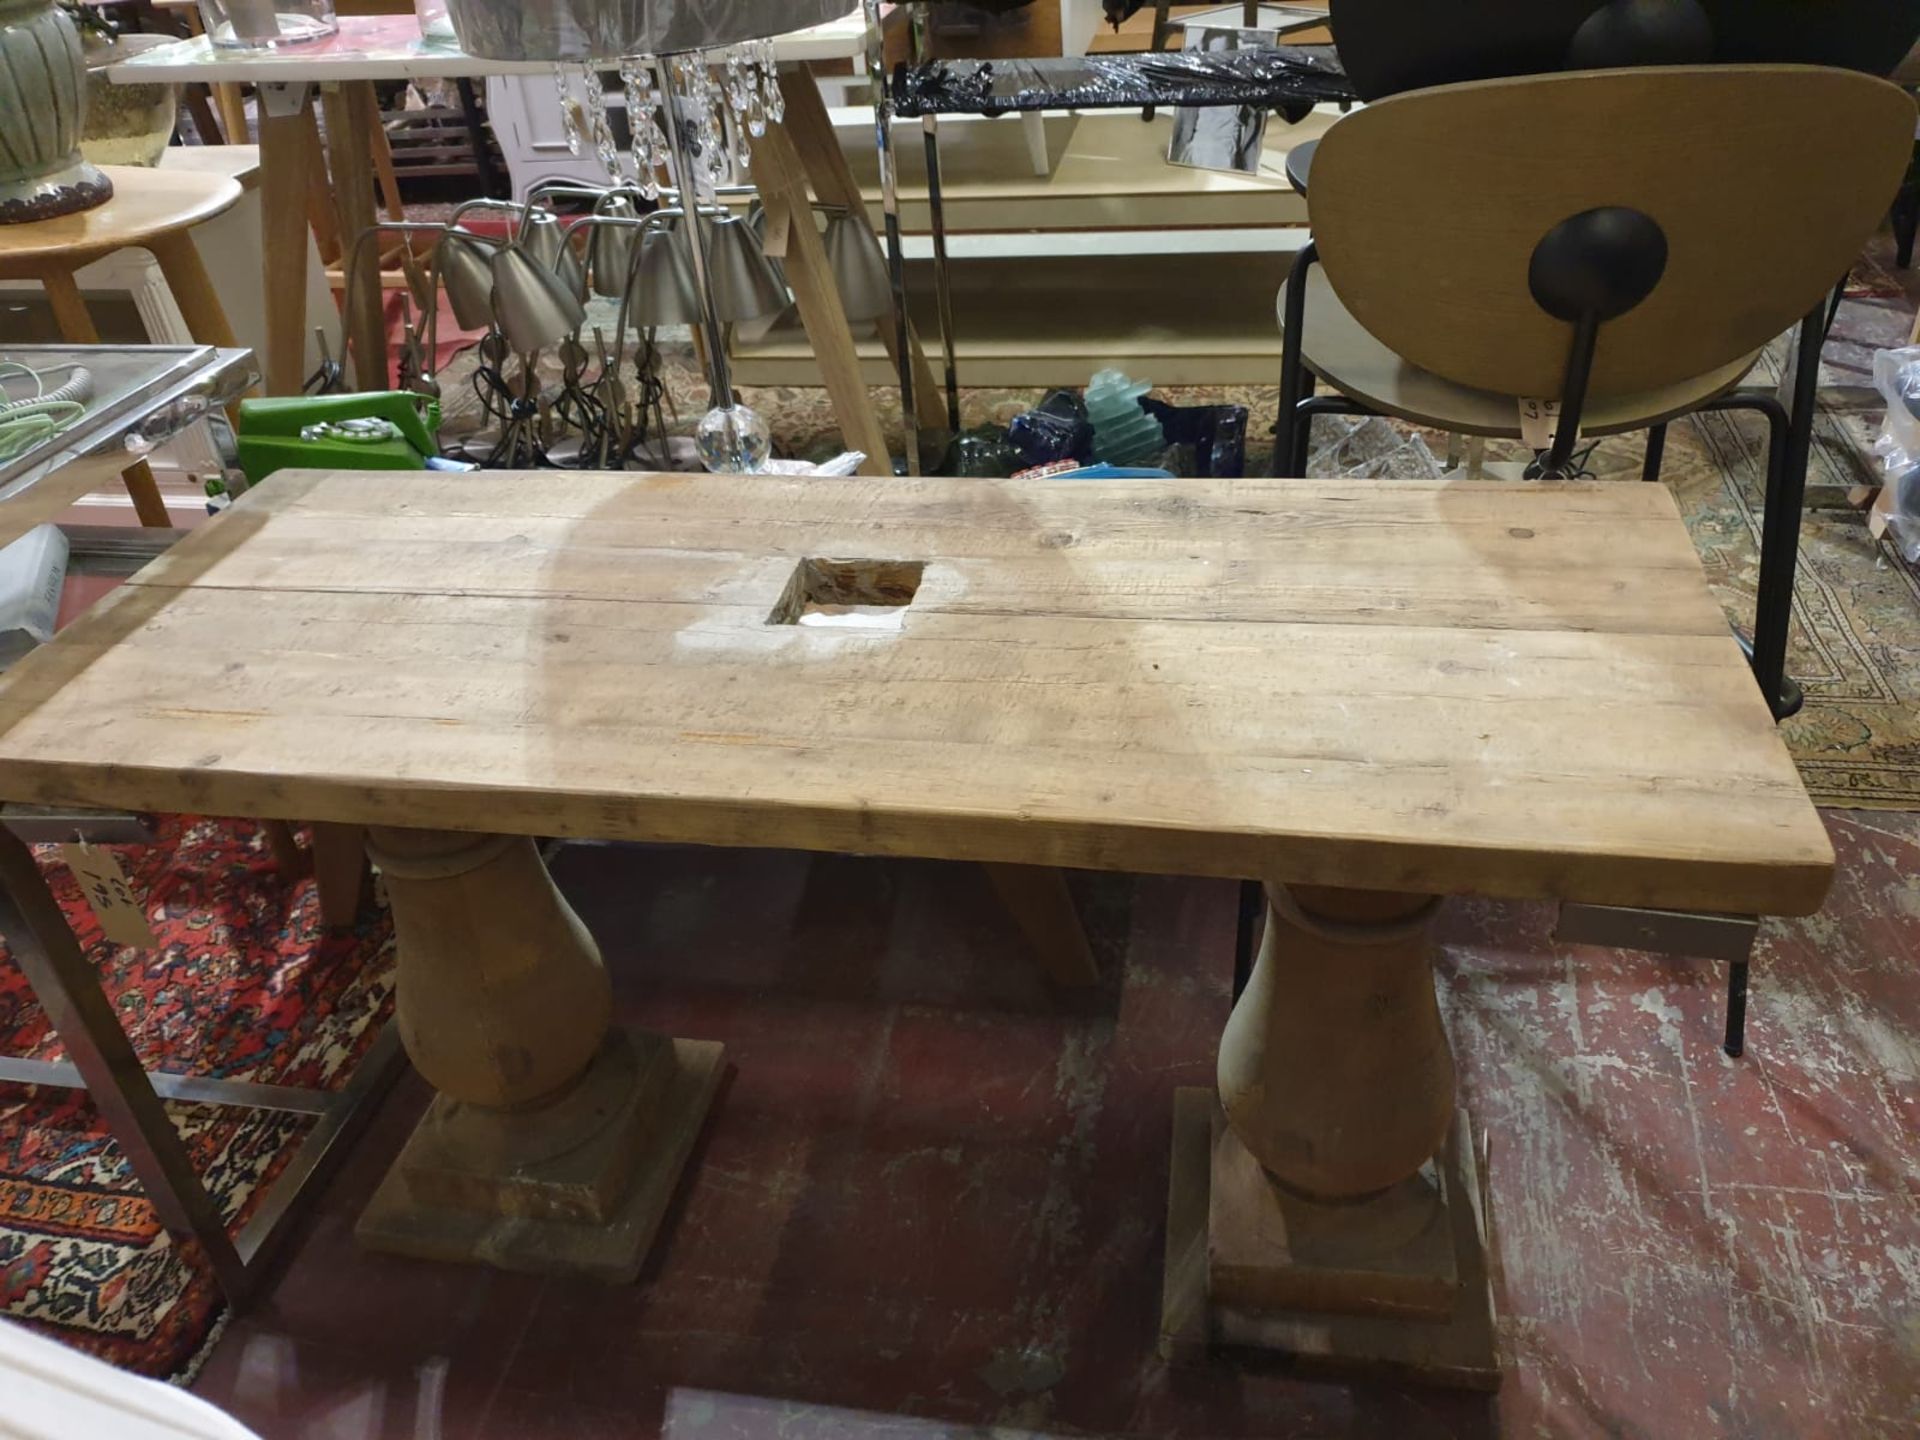 A Rustic Reclaimed Wood Bench Table With Cut Through For Basin 120 X 47 X 65cn (SR195) Ex Showroom